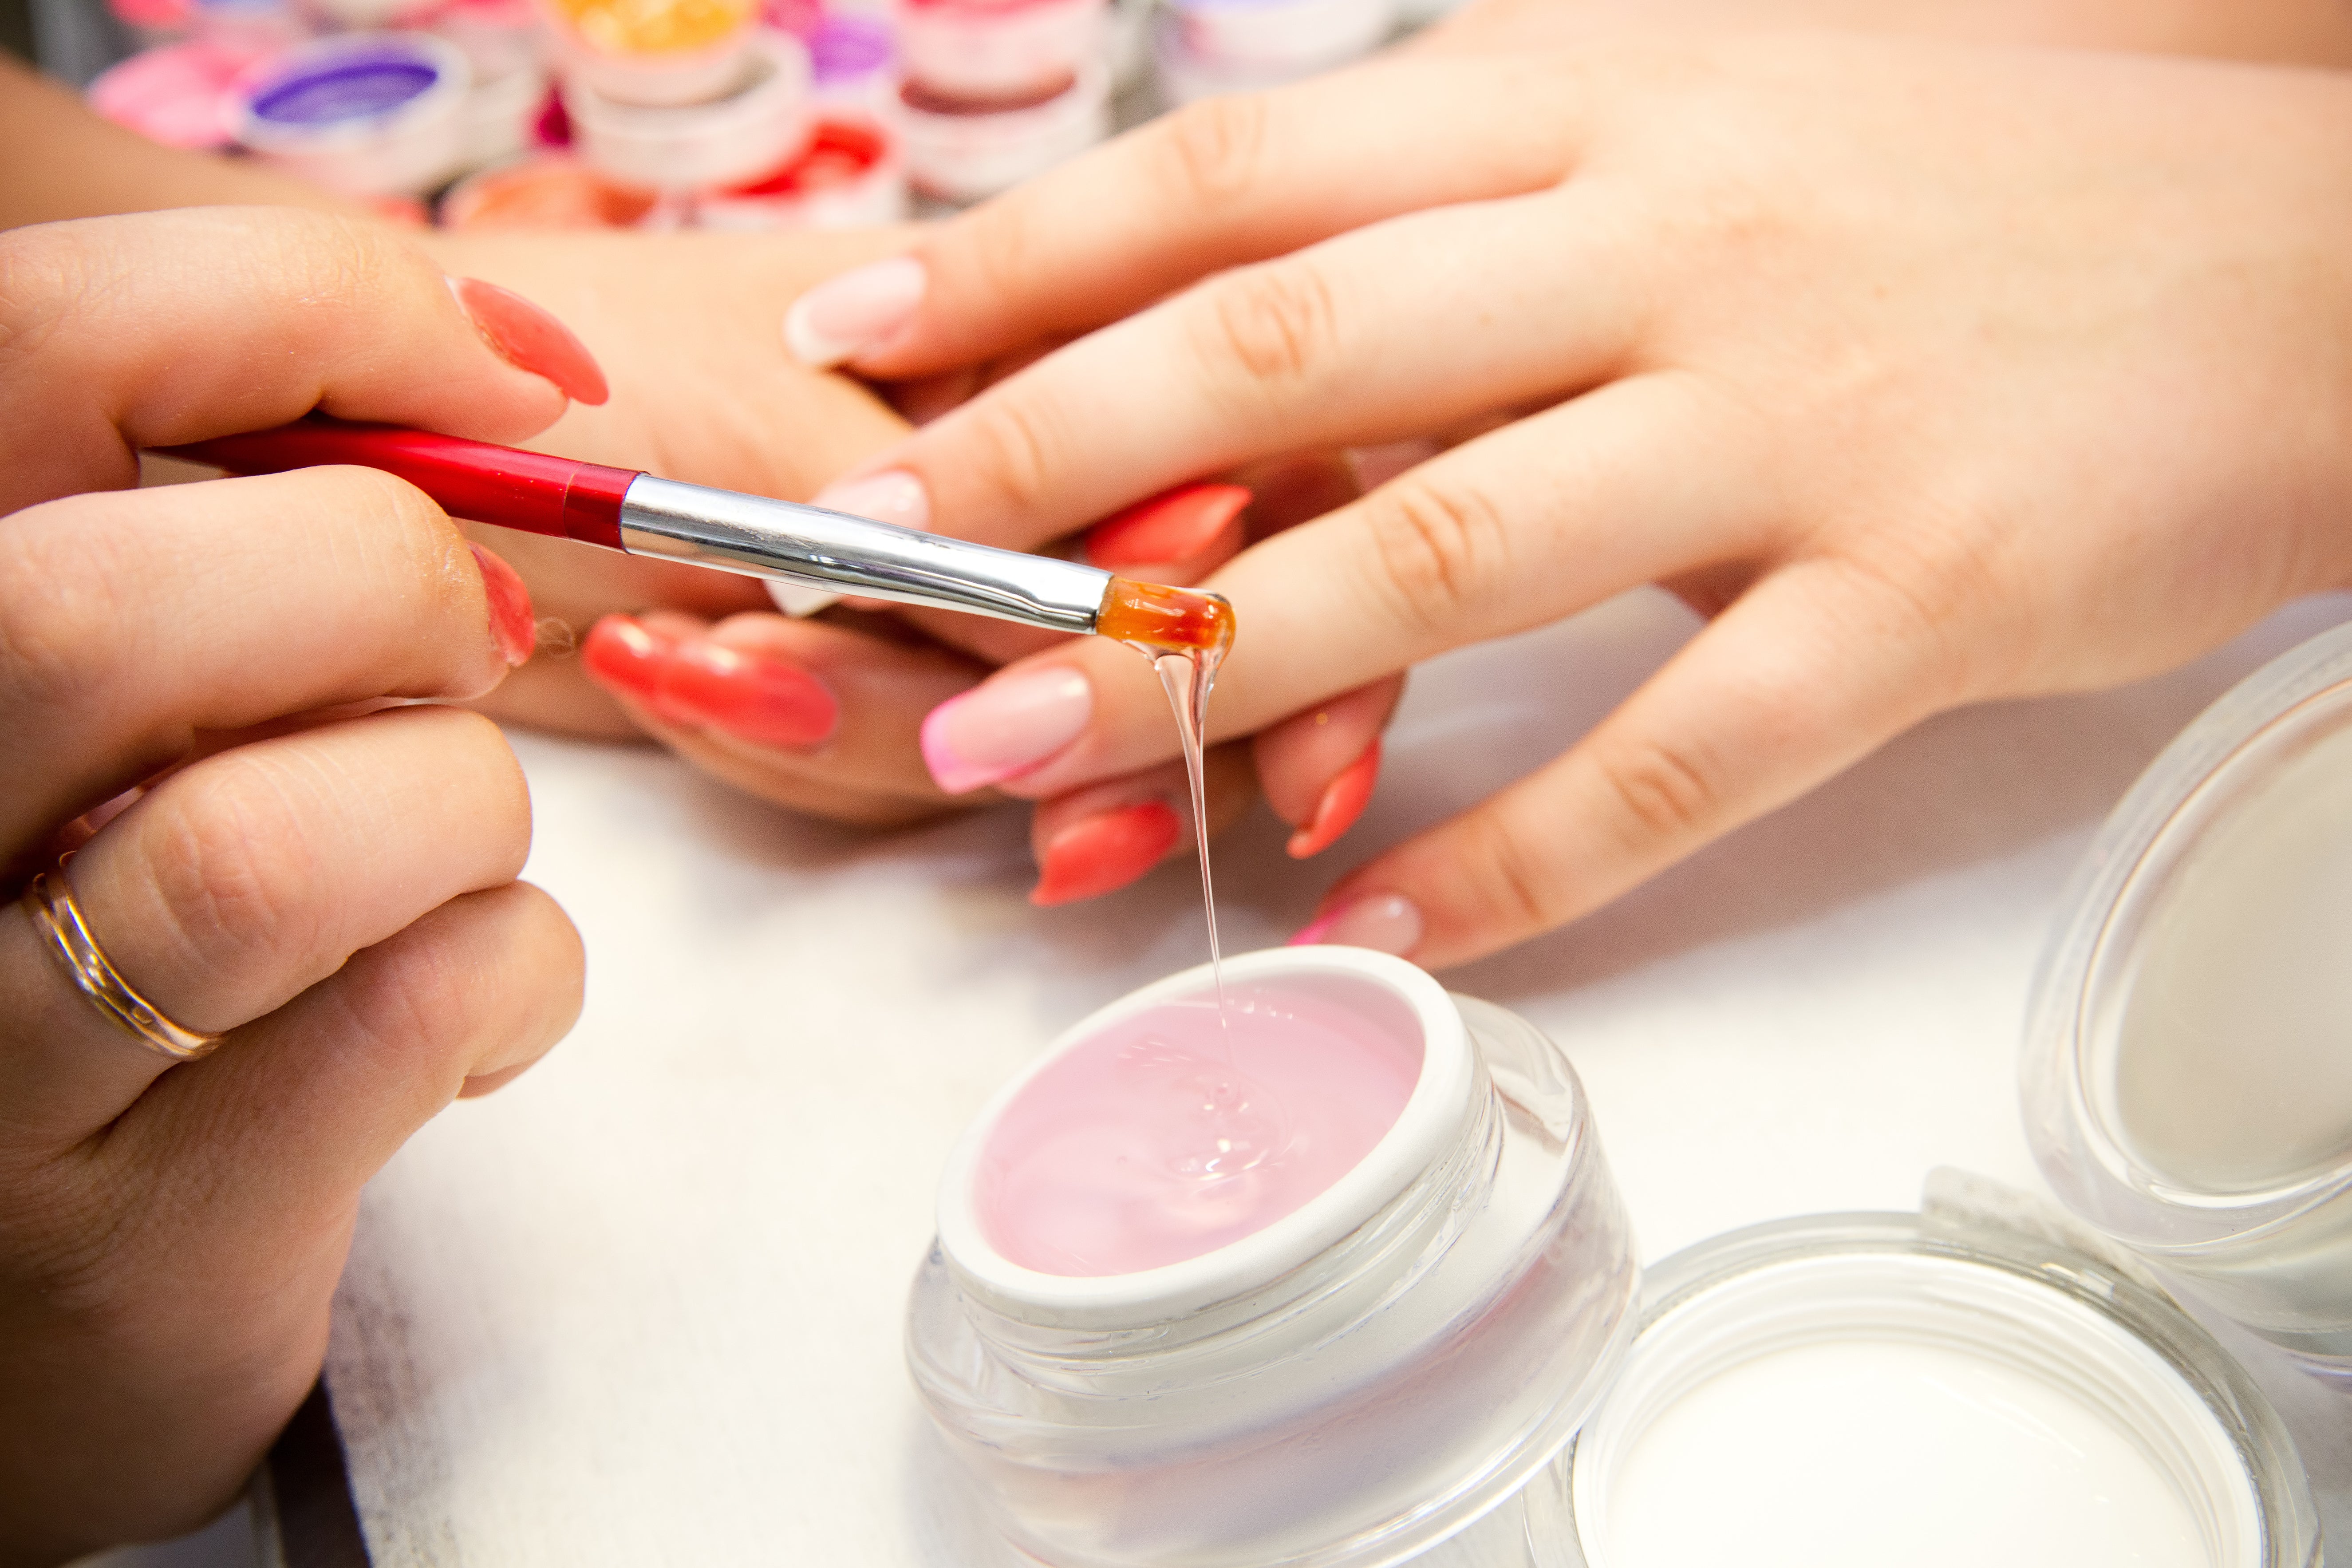 Gel Pedicures: Everything You Need to Know About Gel Pedicures